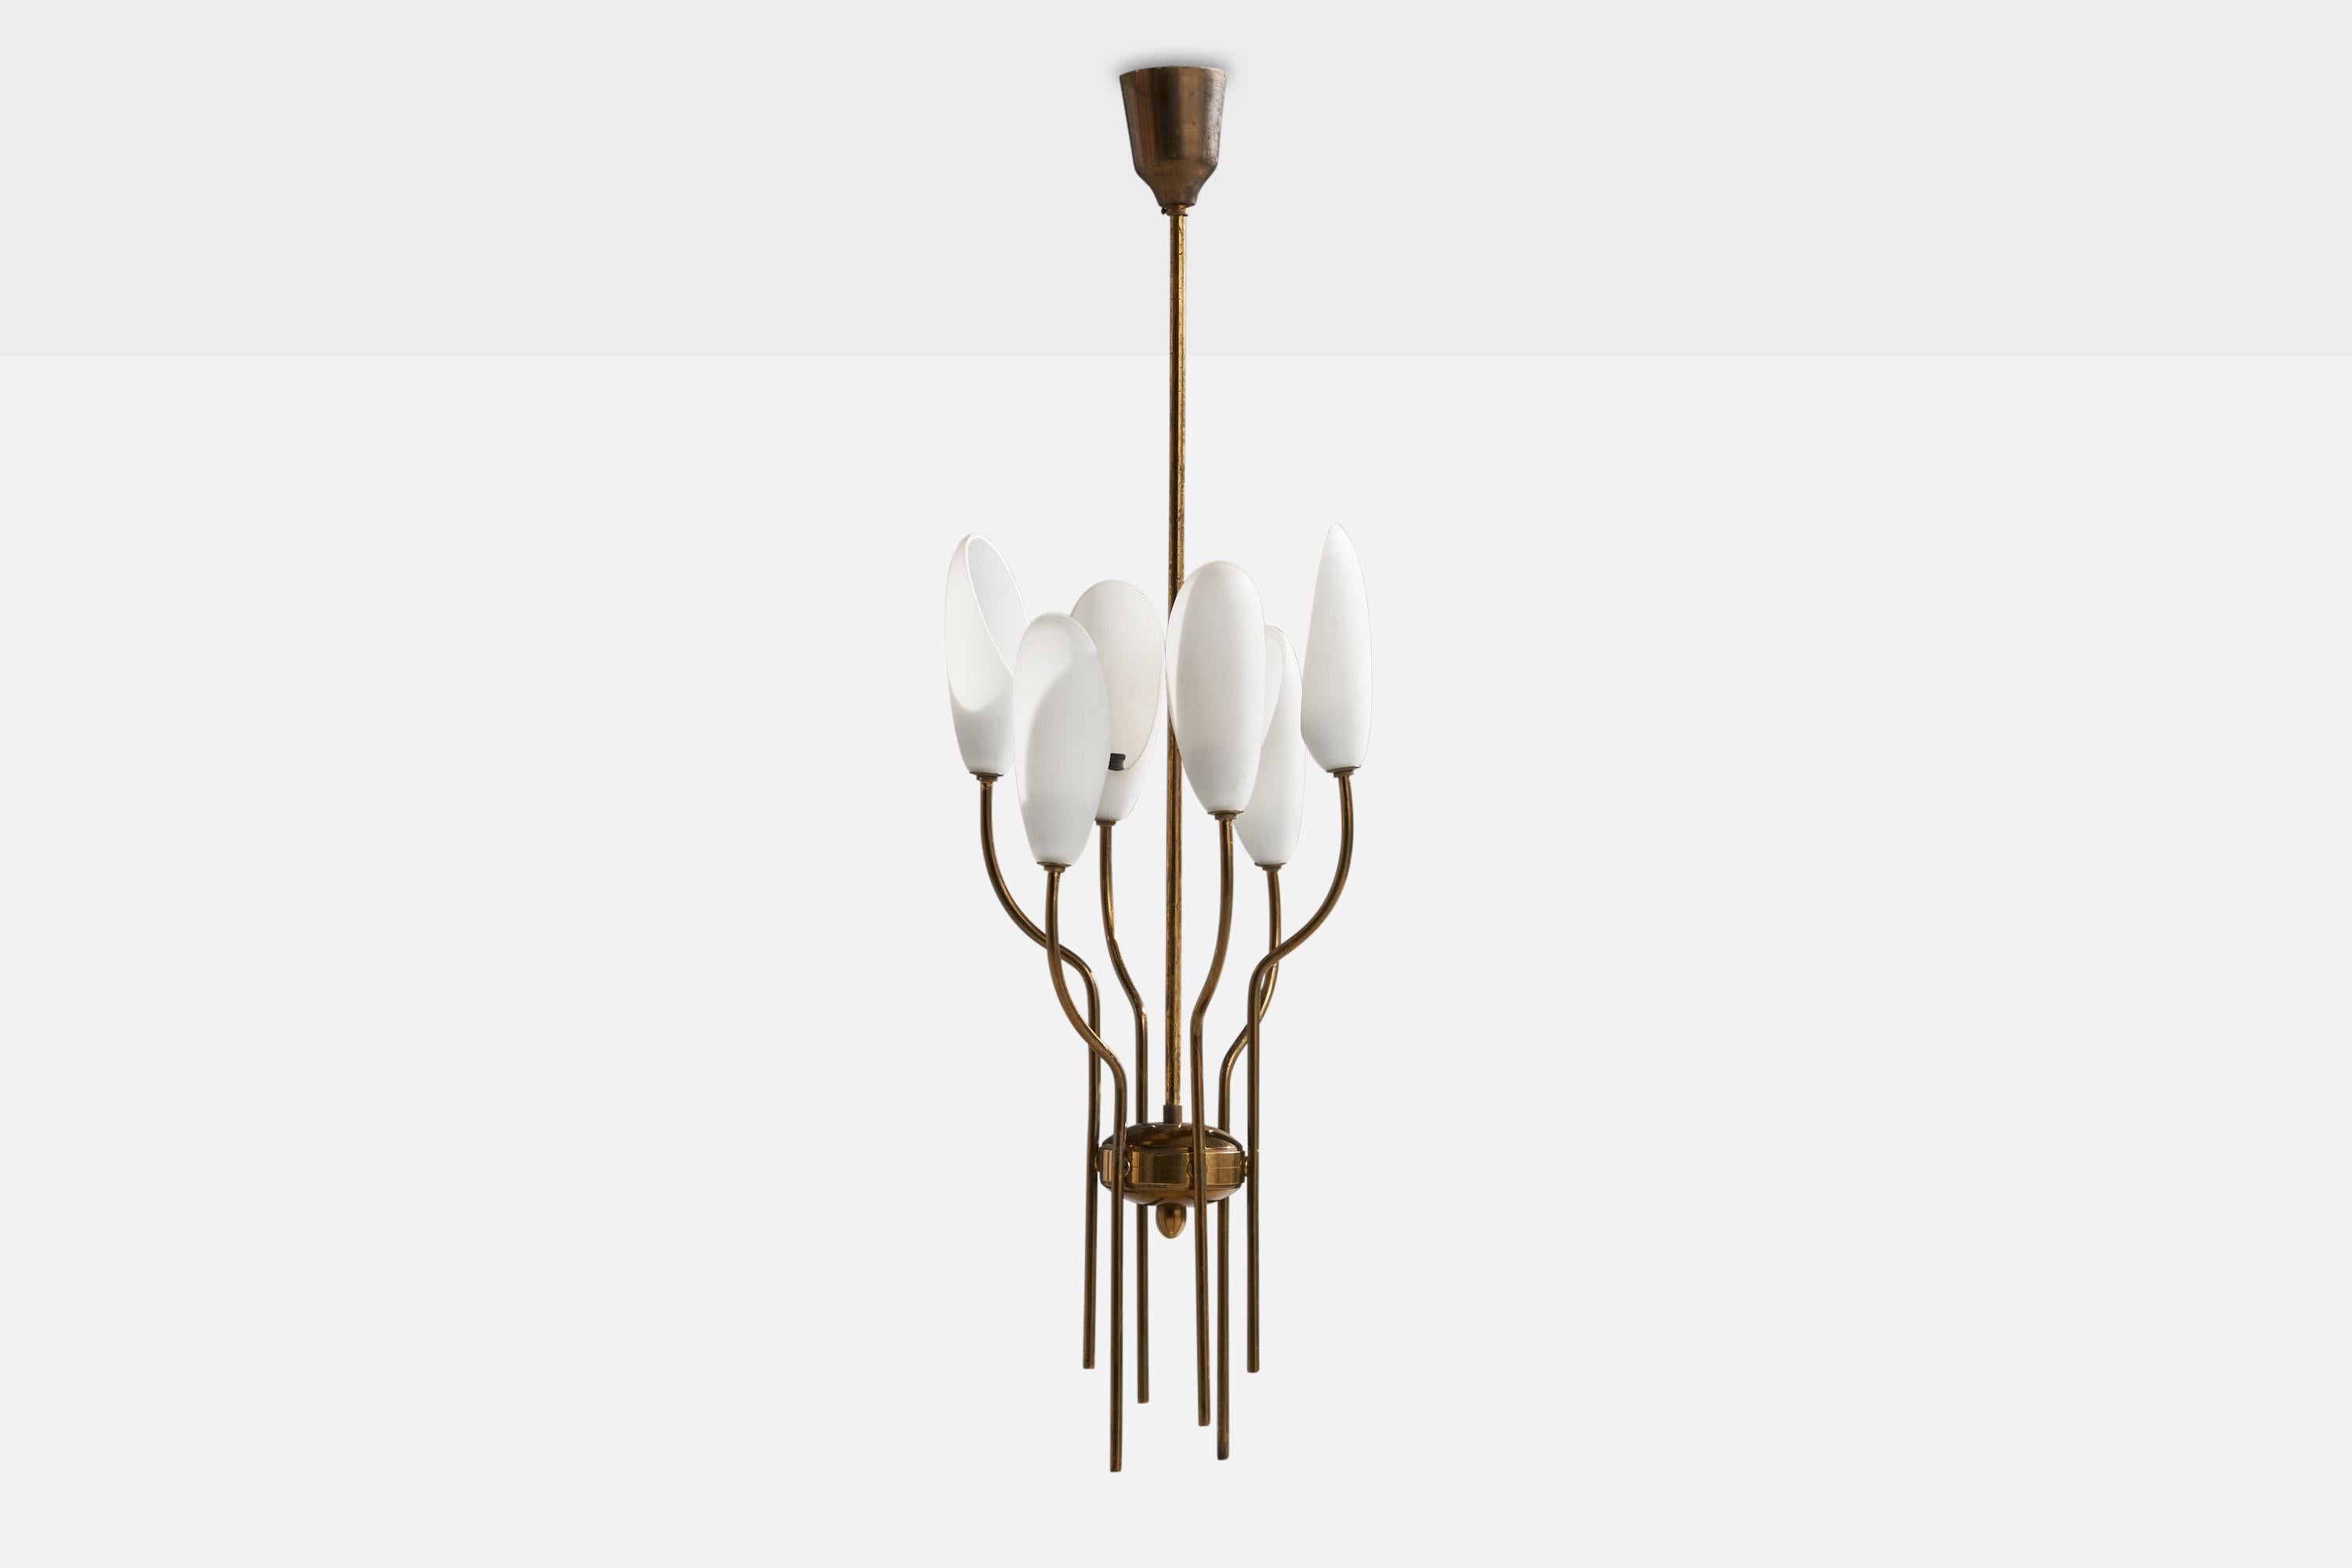 A brass and opaline glass chandelier designed and produced in Italy, 1940s.

Dimensions of canopy (inches): 3.50” H x 2.5” Diameter
Socket takes standard E-14 bulbs. 6 sockets.There is no maximum wattage stated on the fixture. All lighting will be